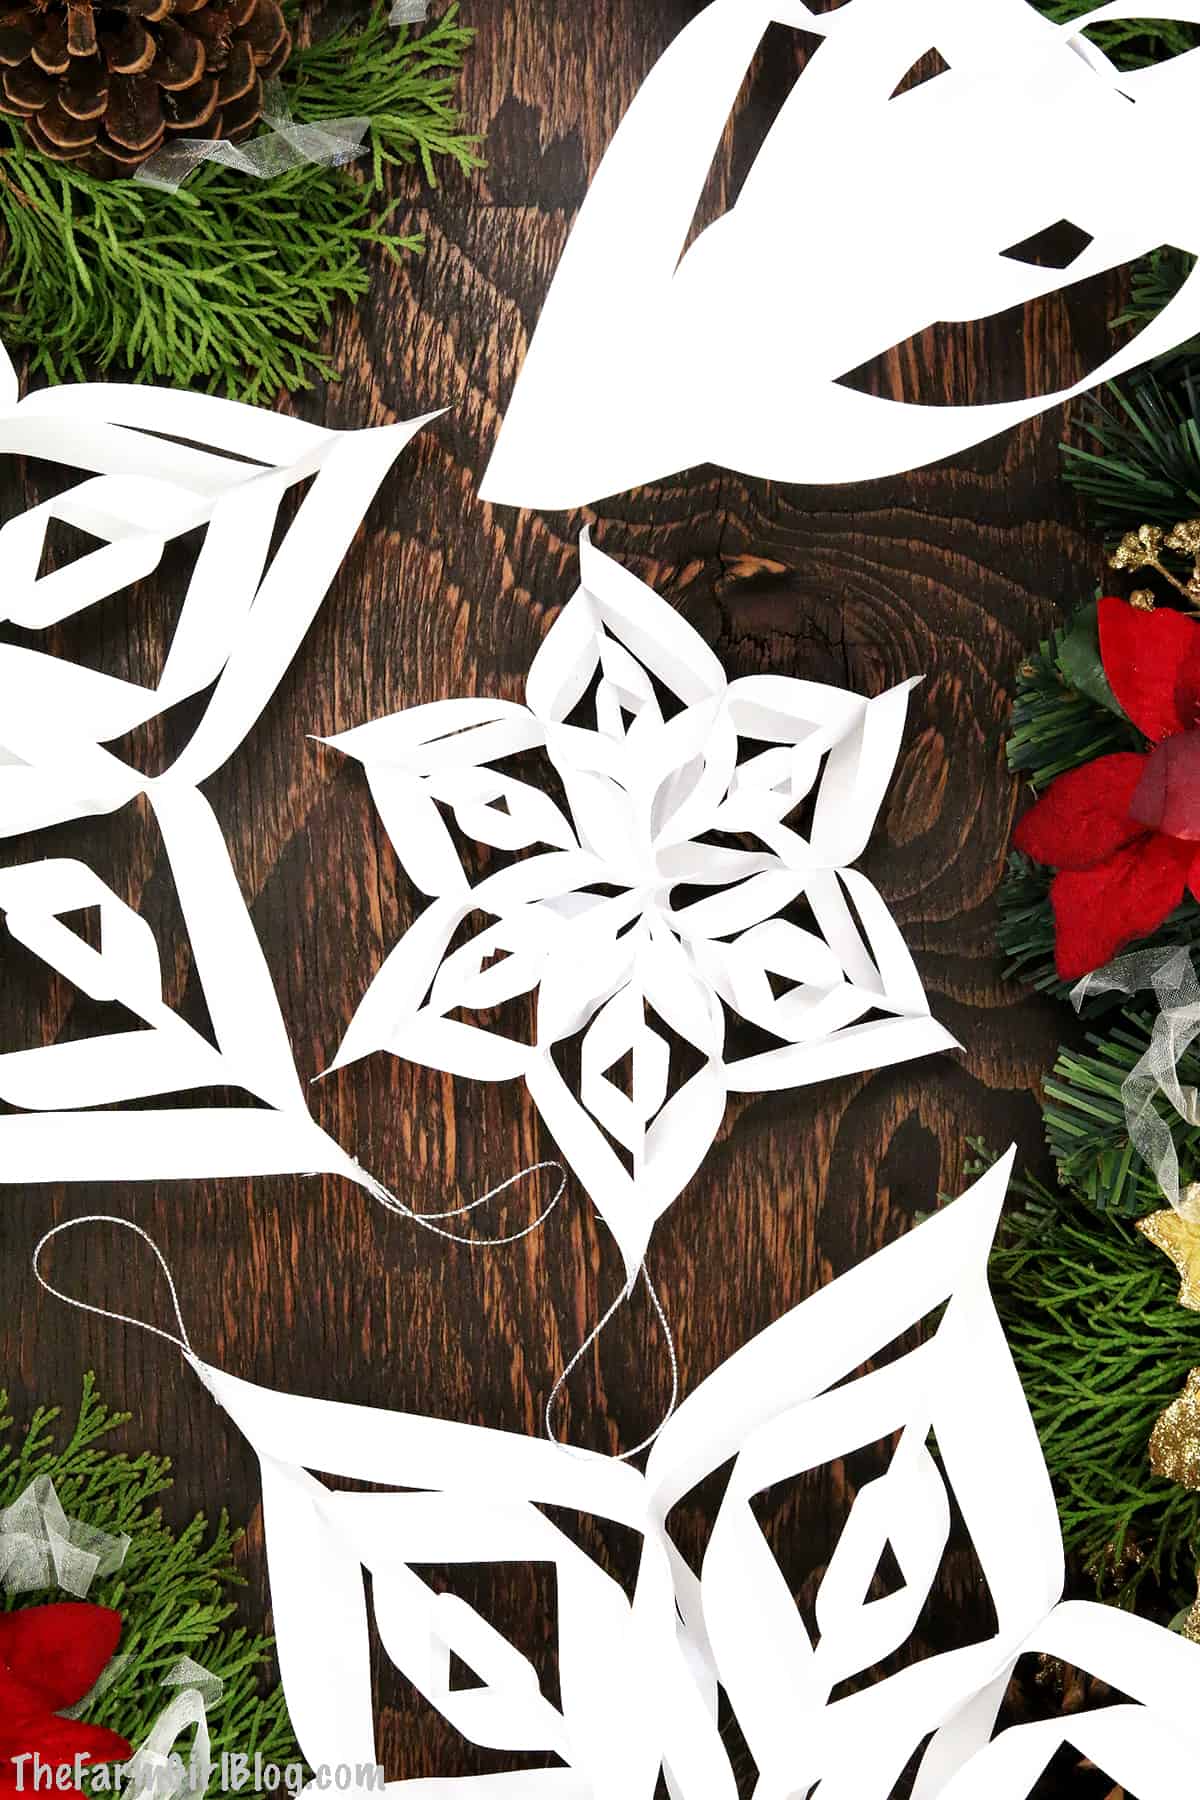 Kids' Christmas break is just around the corner and I have the perfect project for them to do alone or as a family. These Easy 3D Paper Snowflakes are so much fun to make not only for kids but adults enjoy them as well. 